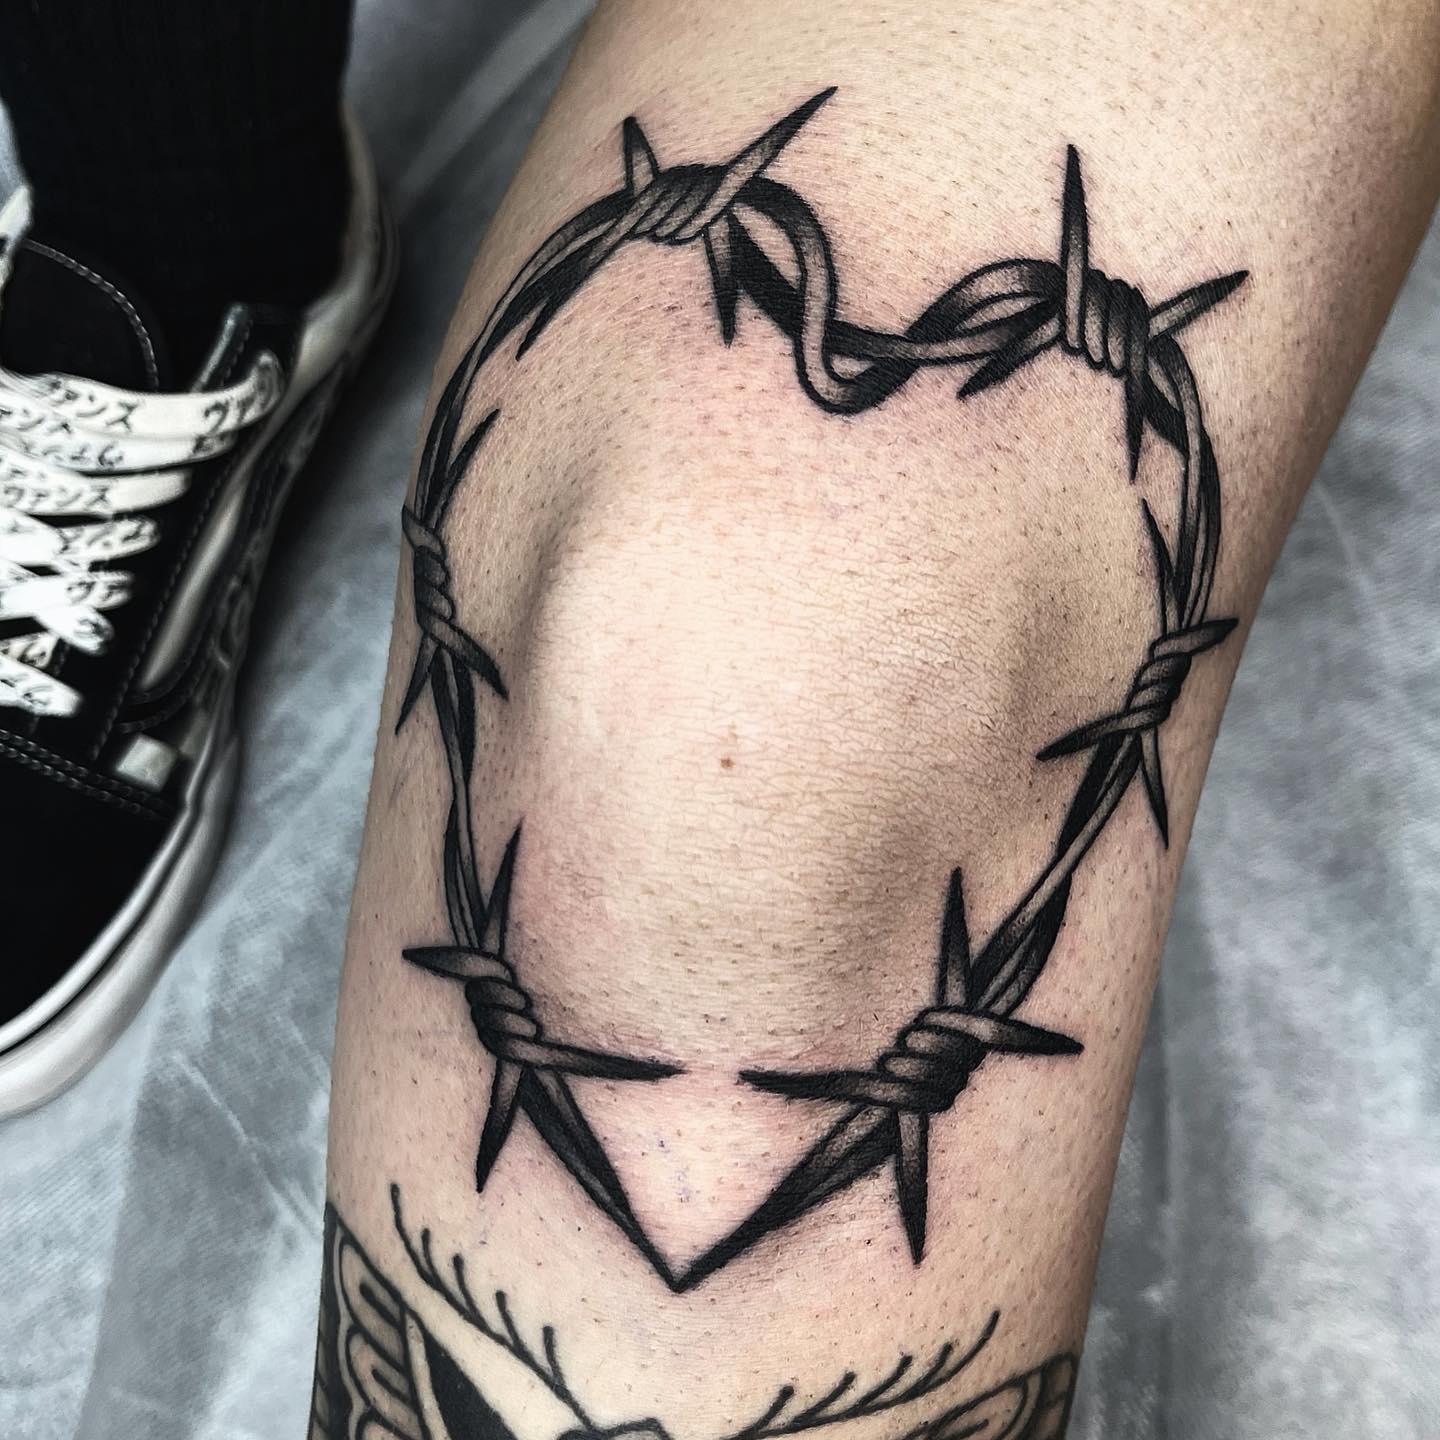 Barbed wires symbolize strength. With your heart-shaped barbed wire tattoo, you can make everyone think that the way you love is tough. If you are in a tough love, you do not let anyone ruin your relationship, right? To symbolize this meaning on your body, go for this beautiful tattoo.